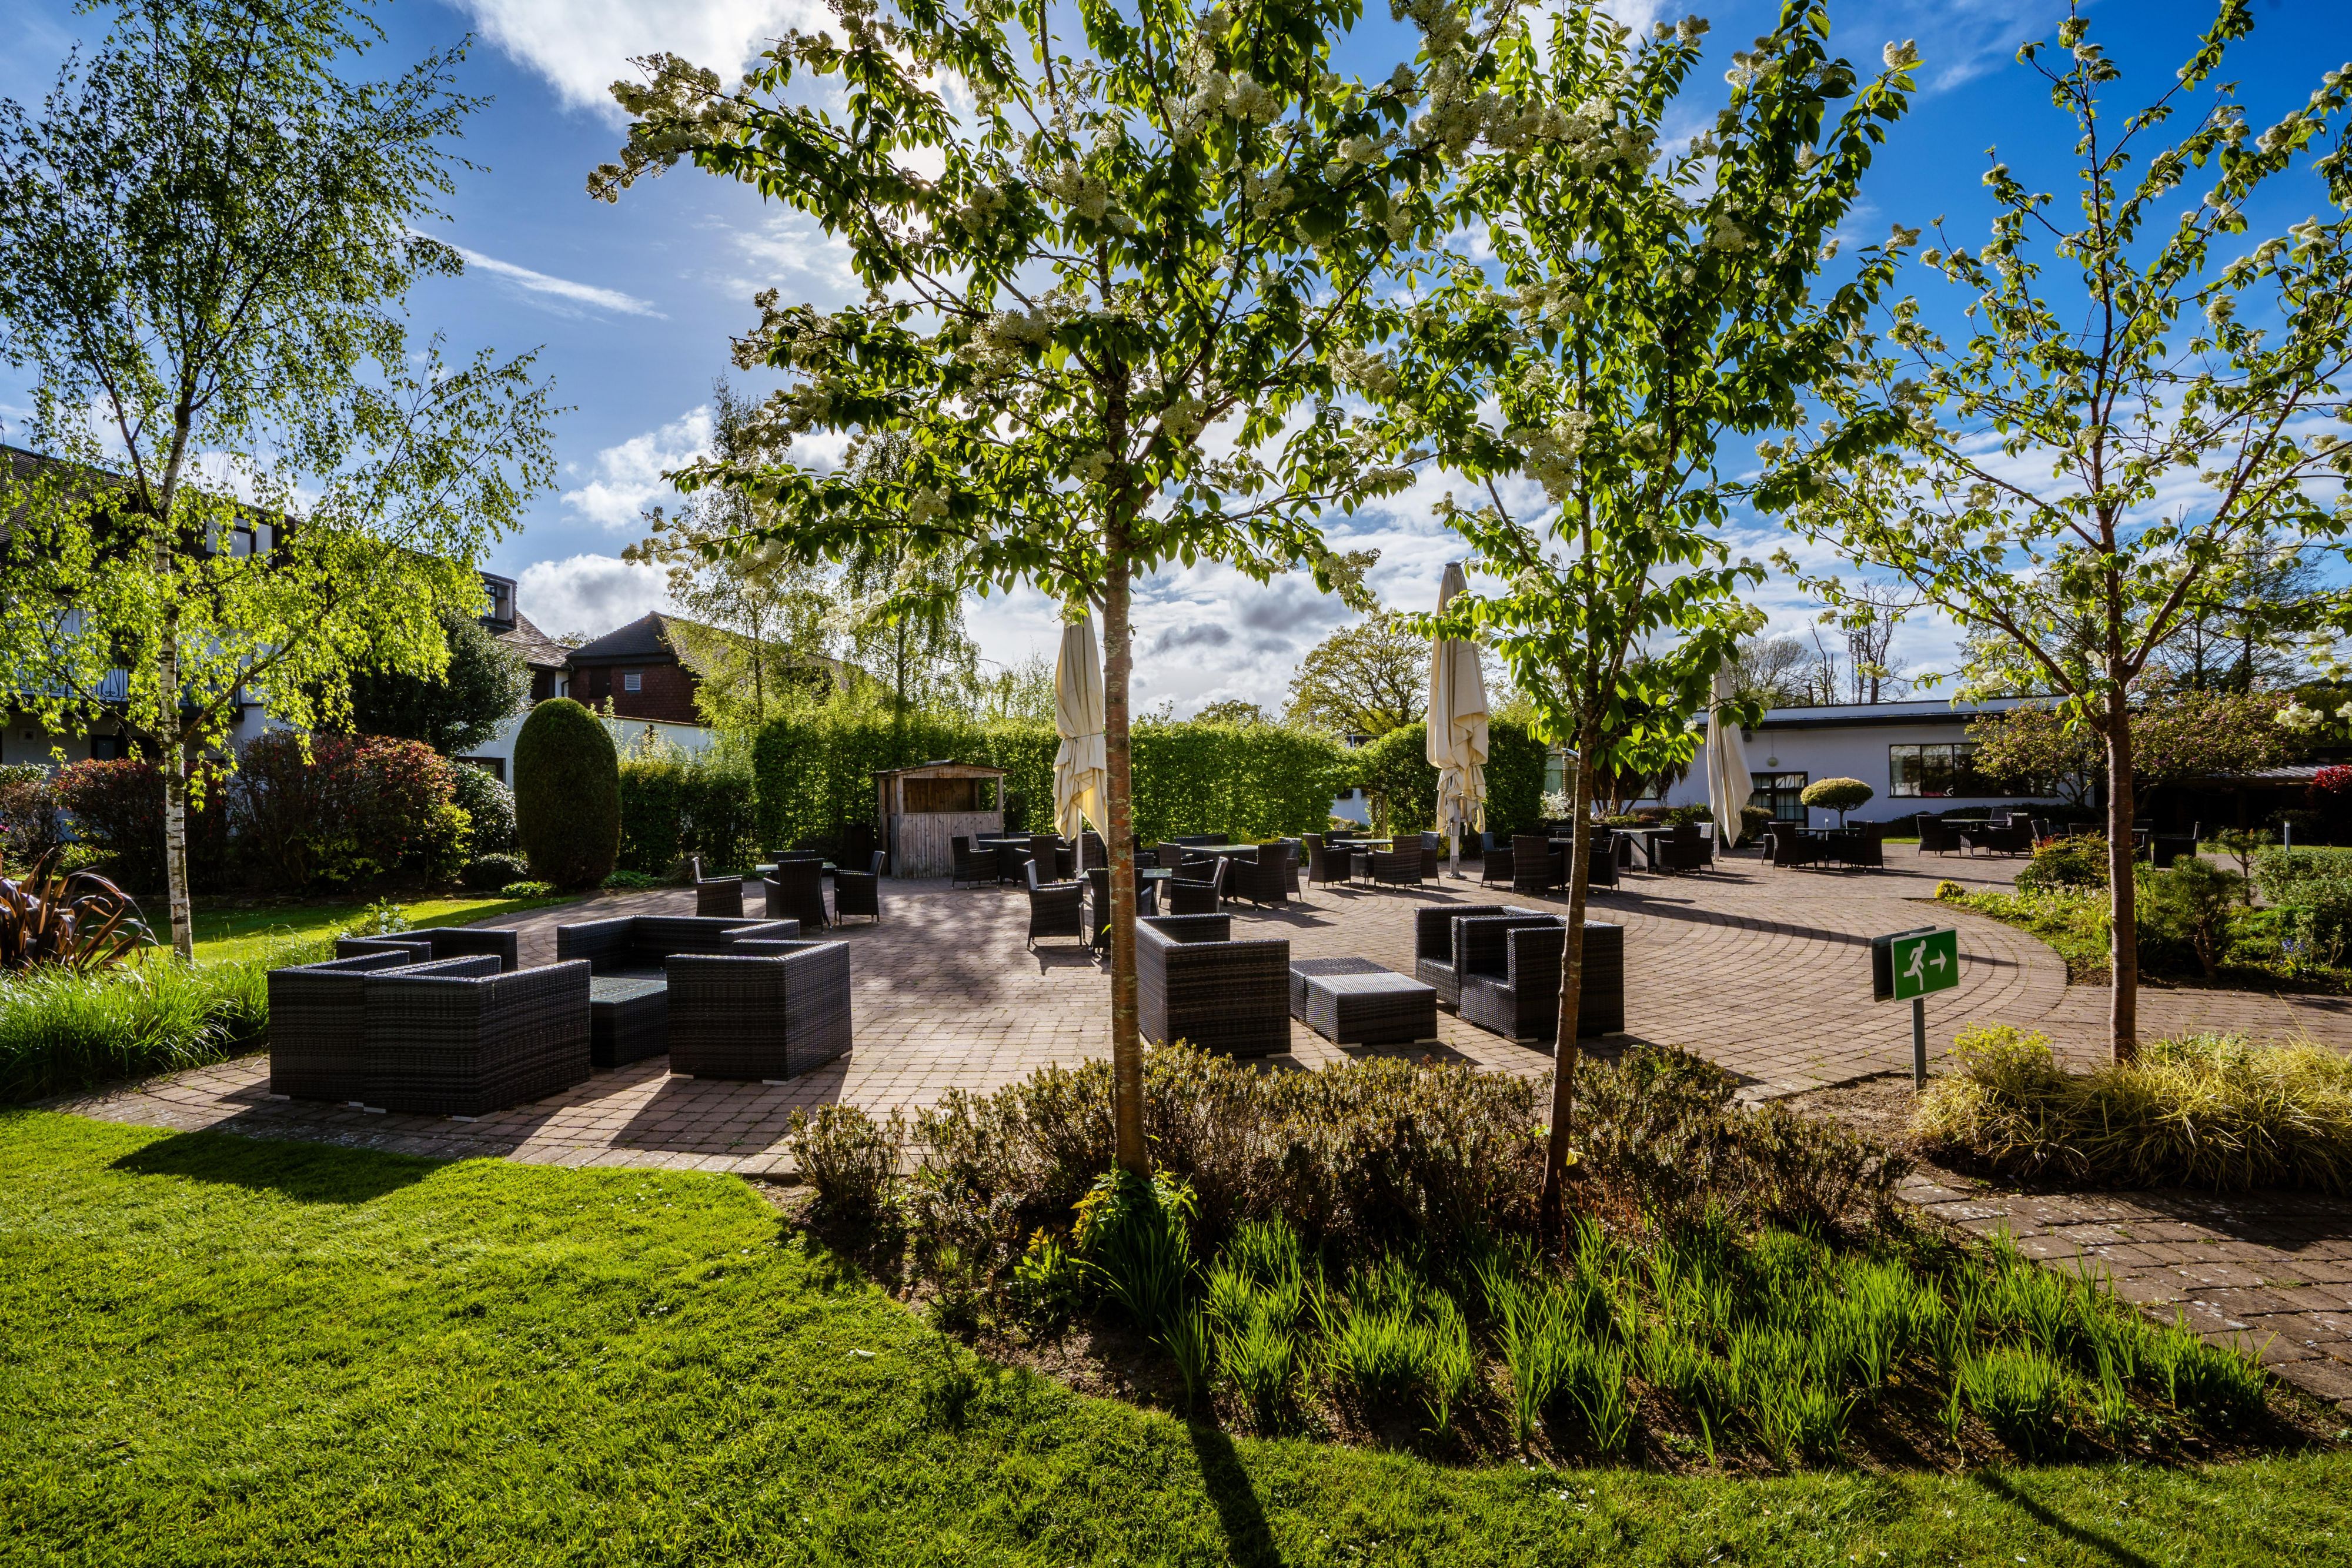 Courtyard garden with al fresco dining area for guests to enjoy.